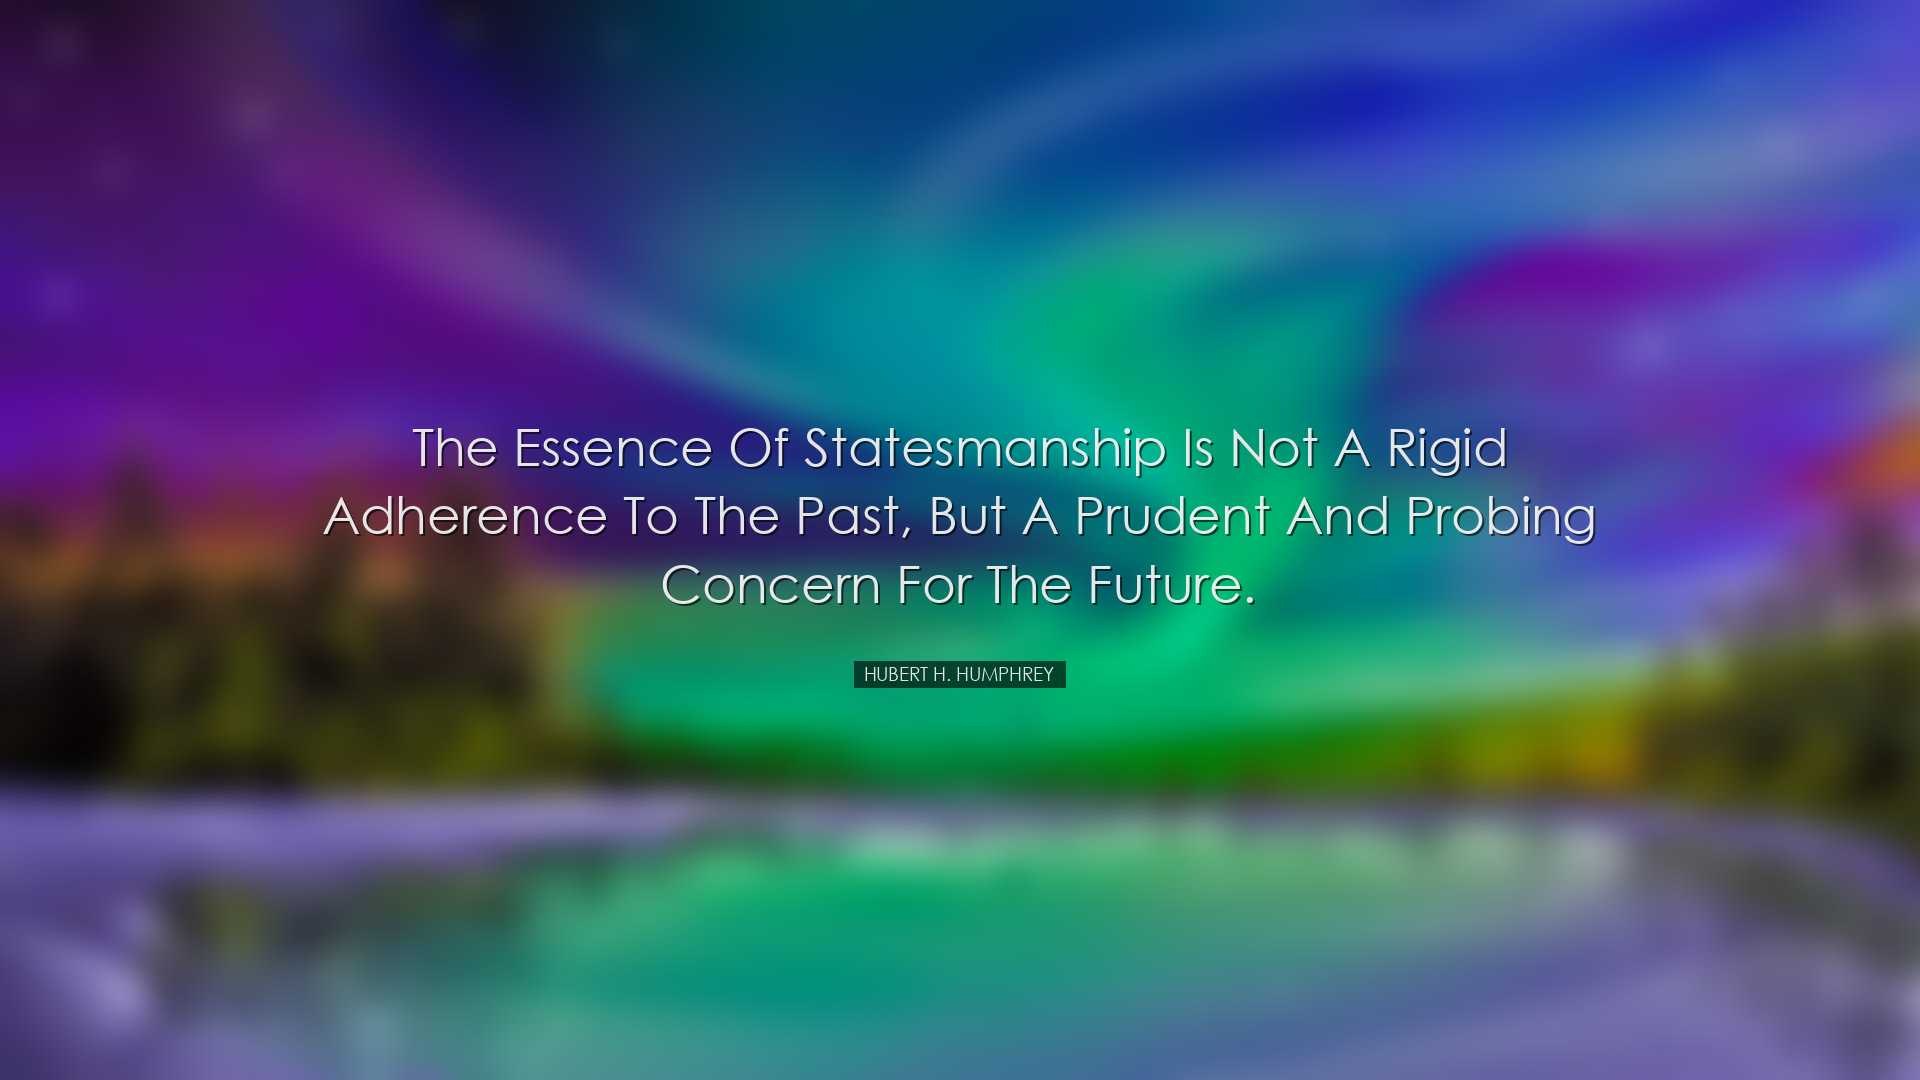 The essence of statesmanship is not a rigid adherence to the past,